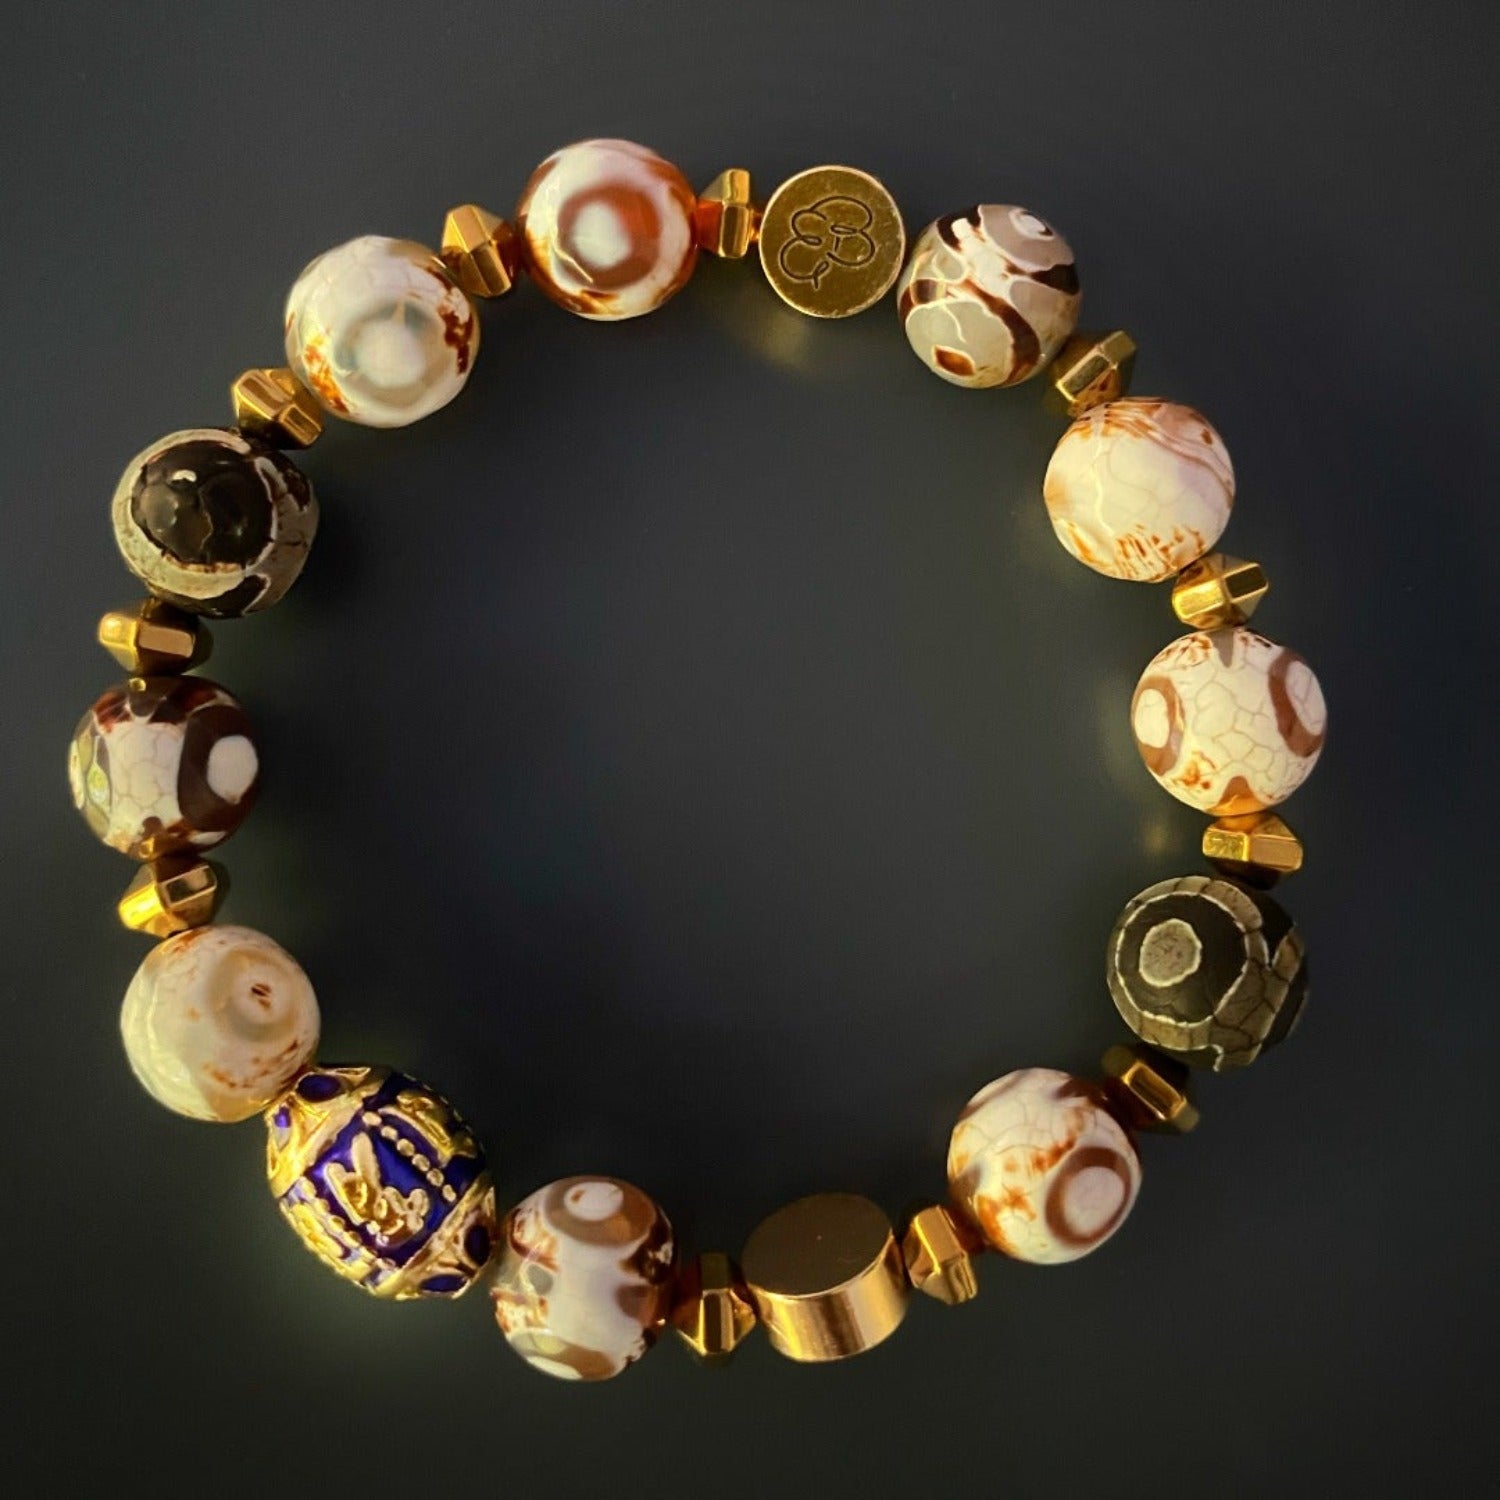 Adorn your wrist with the Lucky Fish Bracelet Set, a handmade accessory showcasing Tibetan agate beads, gold hematite, and symbolic charms that attract good luck and abundance.